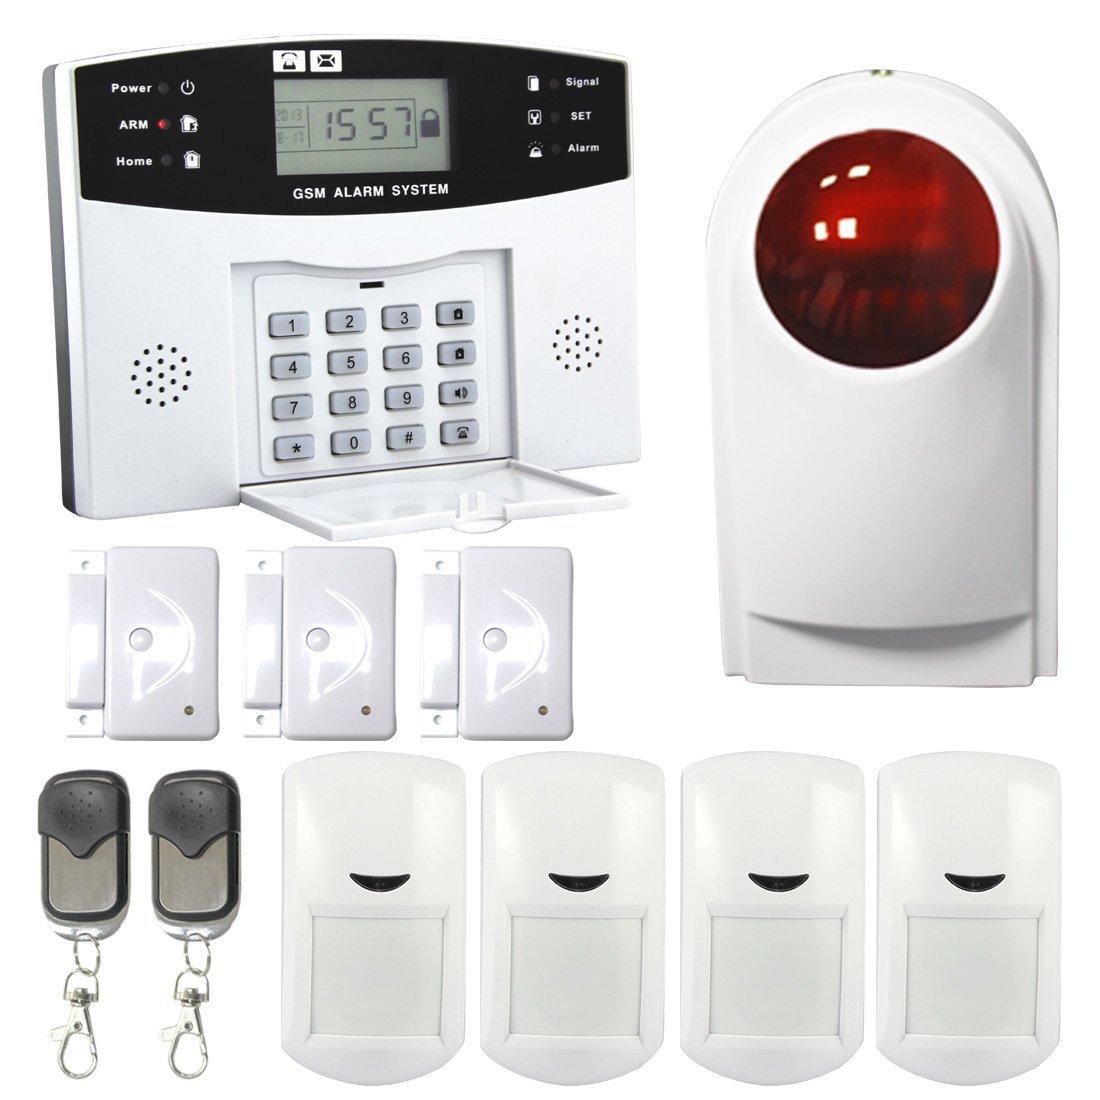 About CCTV \u0026 Alarm Systems | Security 